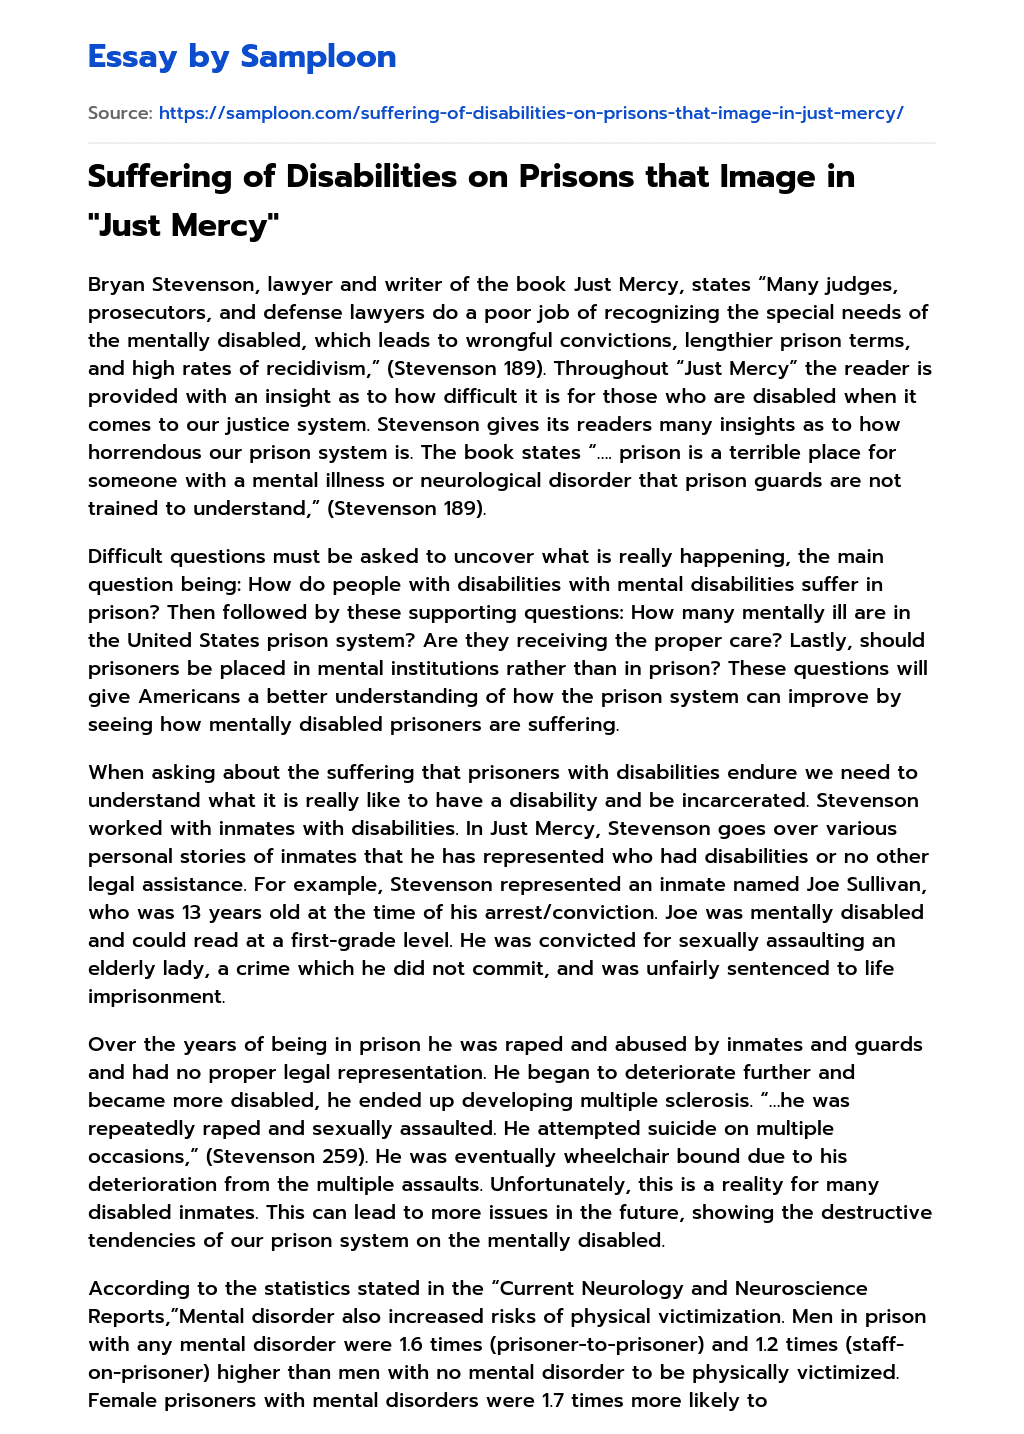 Suffering of Disabilities on Prisons that Image in “Just Mercy” essay